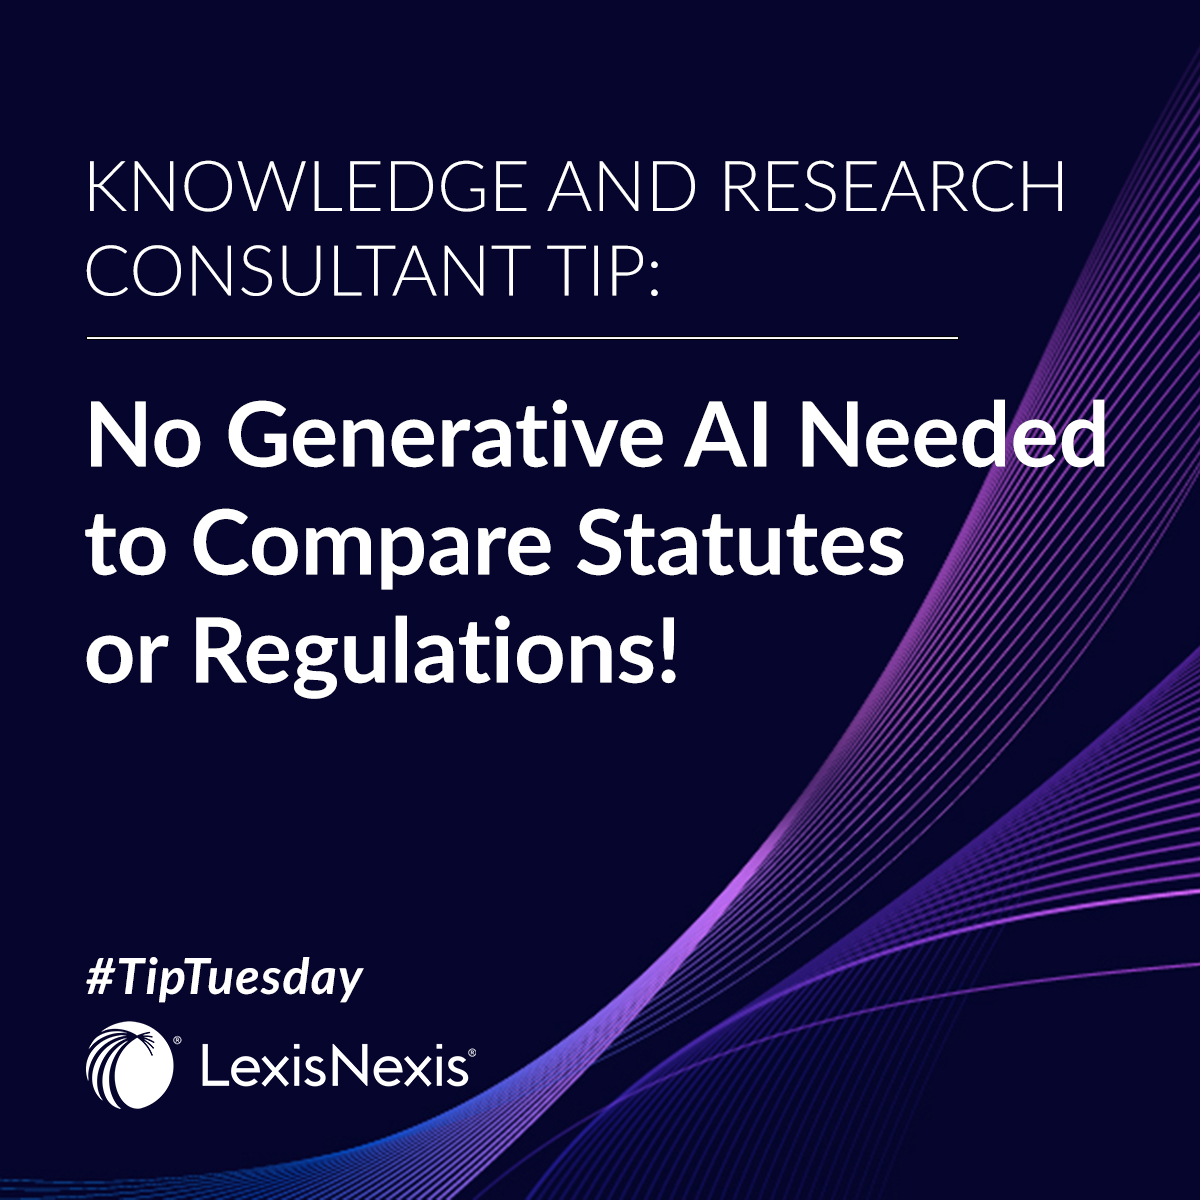 Compare statutes and regulations instantly with Code Compare! View and compare different versions of federal or state statutes or administrative regulations side-by-side or in an overlay format. bit.ly/3WVI6Cz #TipTuesday #LexisNexis